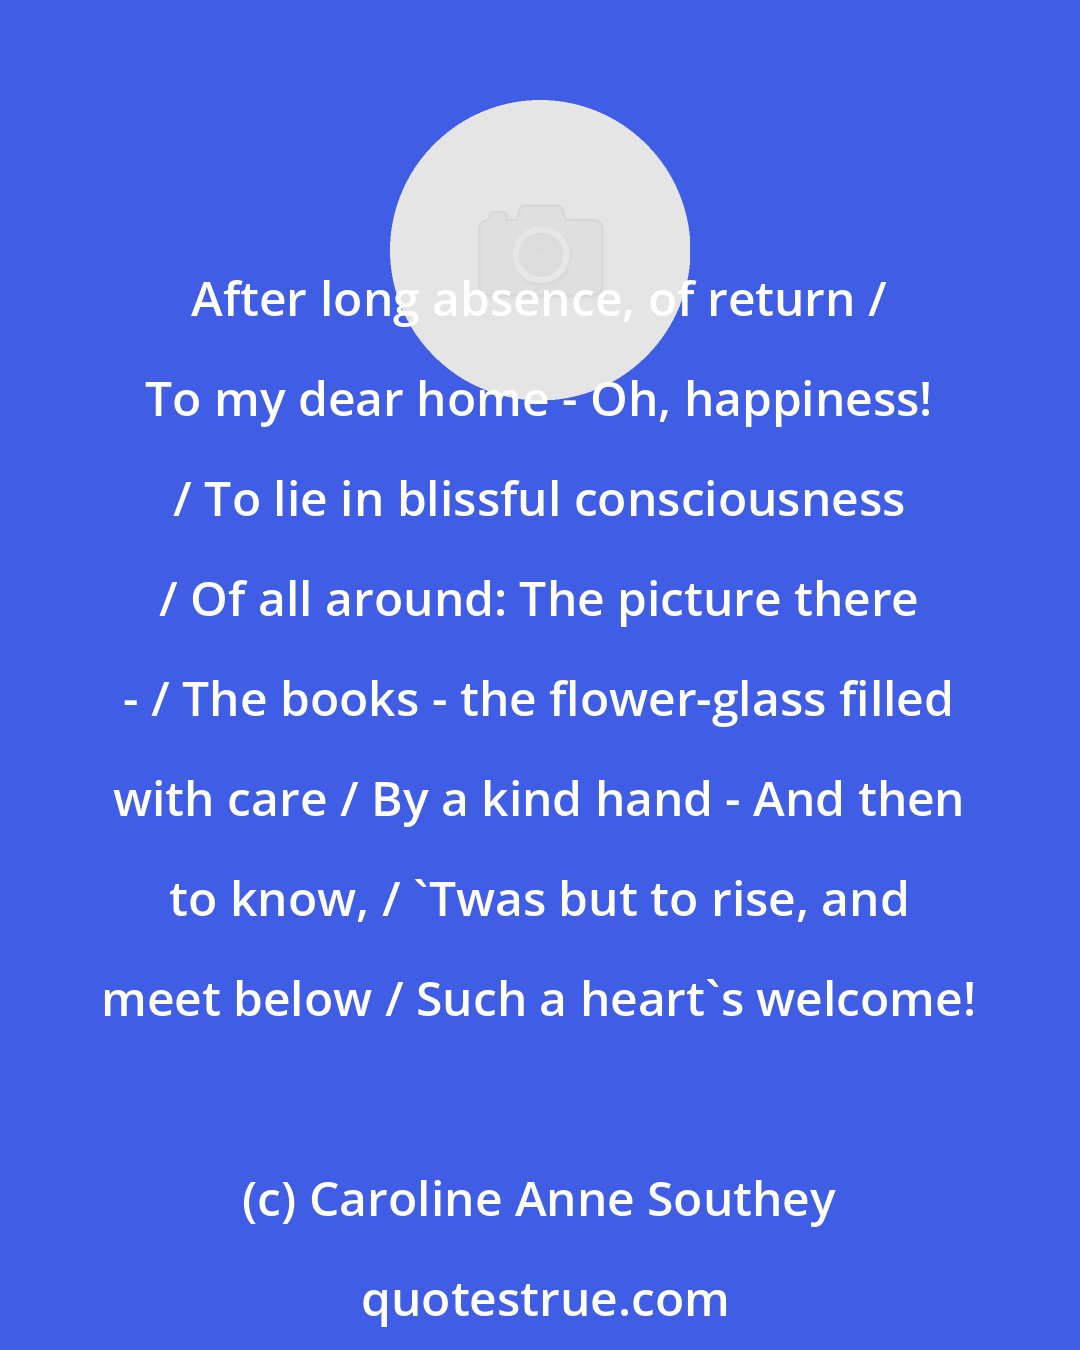 Caroline Anne Southey: After long absence, of return / To my dear home - Oh, happiness! / To lie in blissful consciousness / Of all around: The picture there - / The books - the flower-glass filled with care / By a kind hand - And then to know, / 'Twas but to rise, and meet below / Such a heart's welcome!